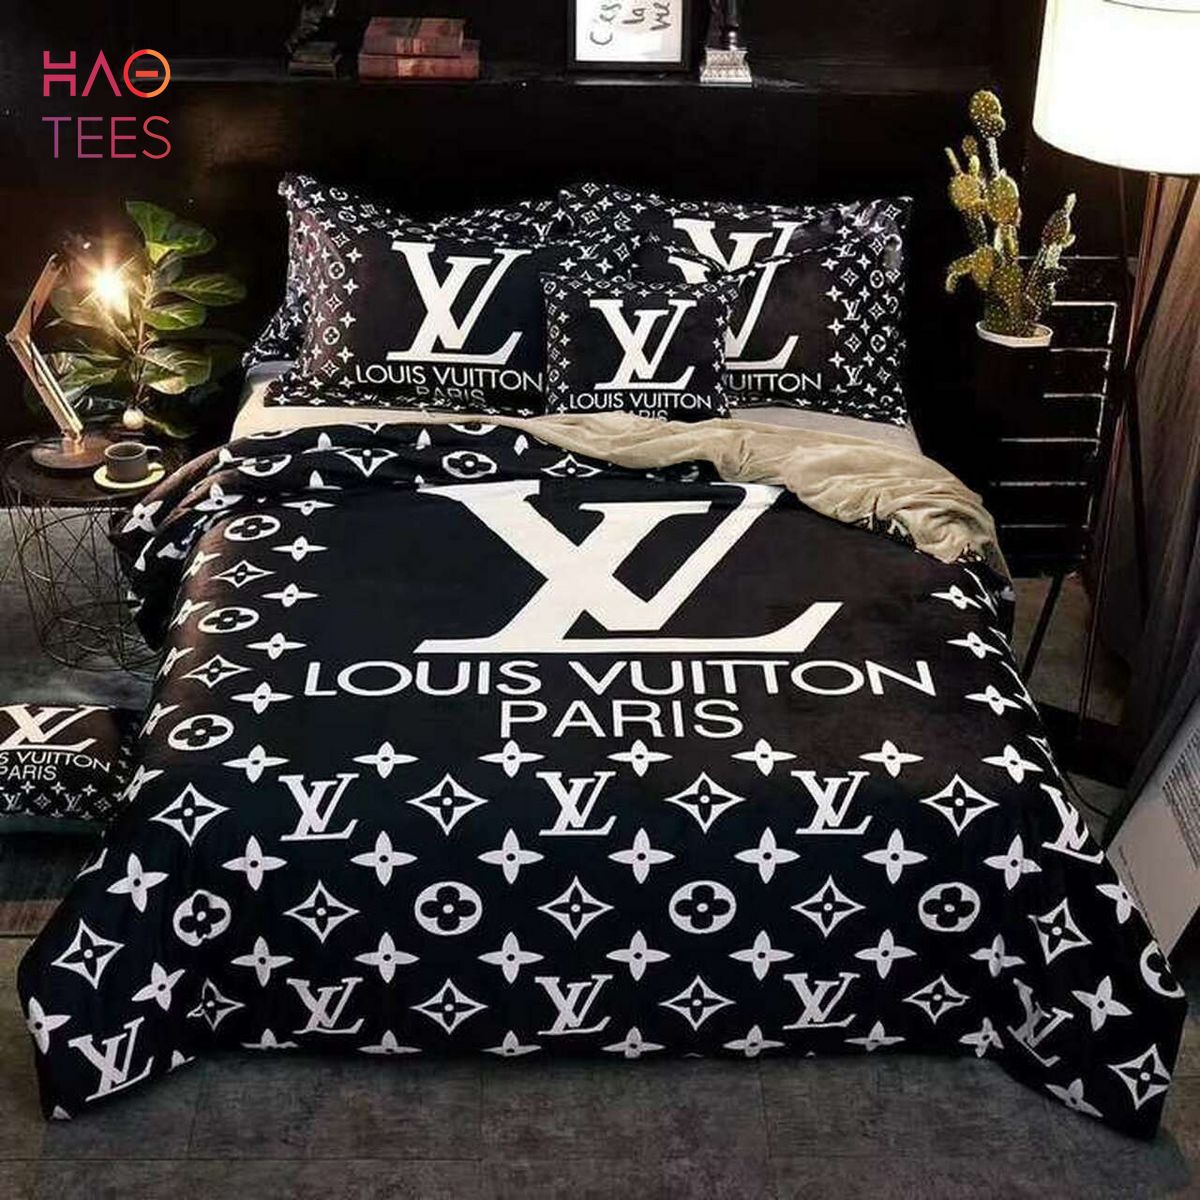 [TRENDDING] LV Luxury Brand Inspired 3D Personalized Customized Bedding Sets